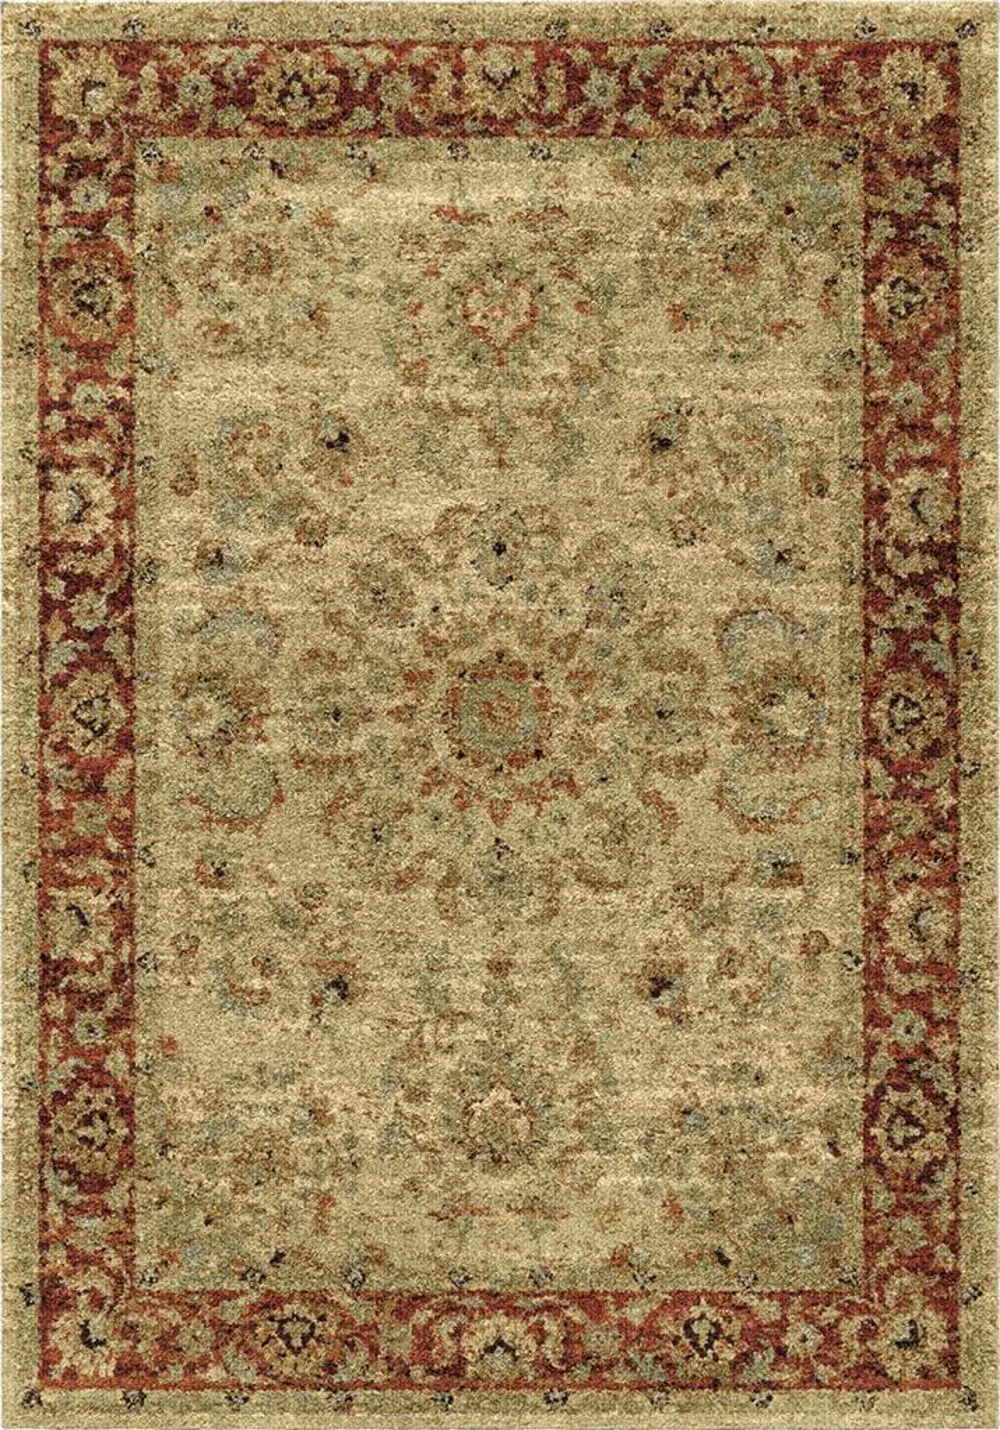 4319/8X11/AMERICANHE 8 x 11 Large Ivory and Red Area Rug - American Heritage-1